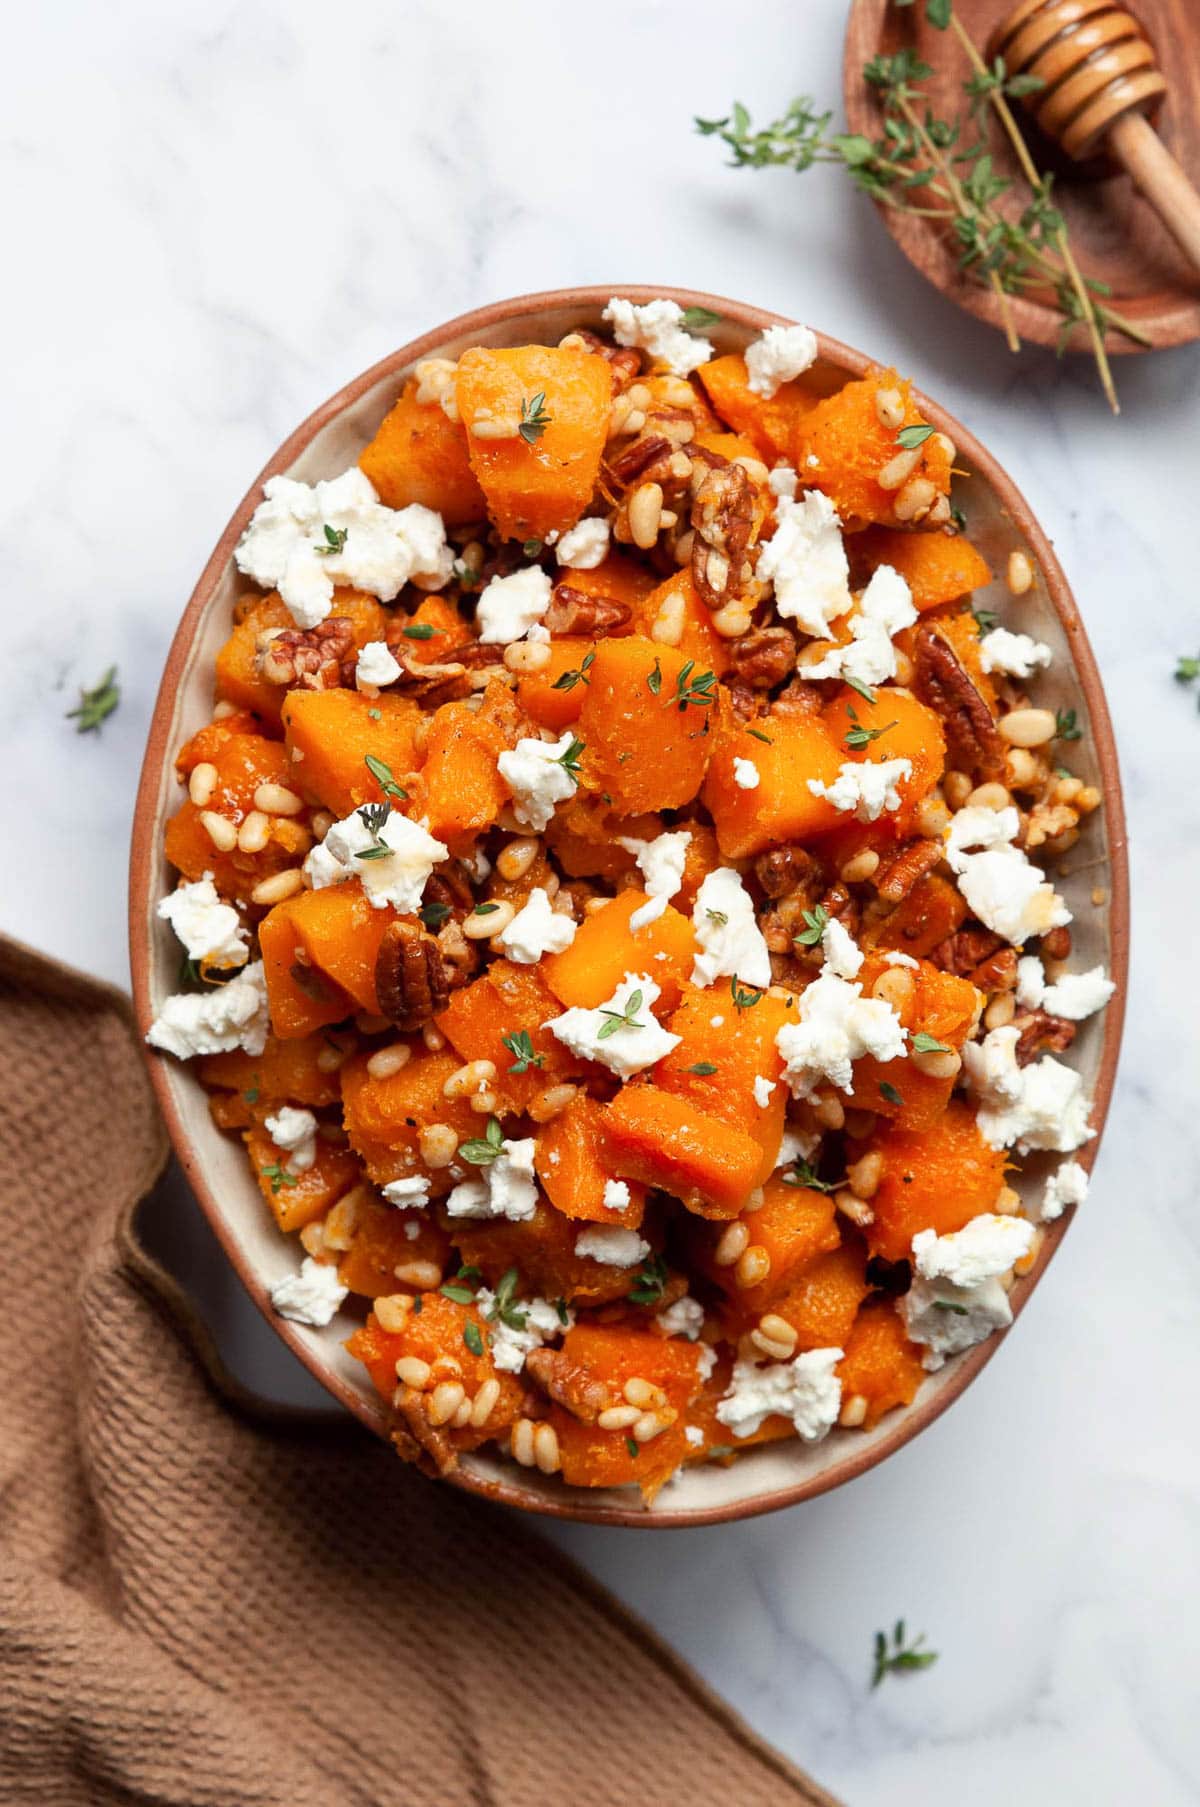 Sauteed butternut squash with pine nuts and goat cheese in a bowl.